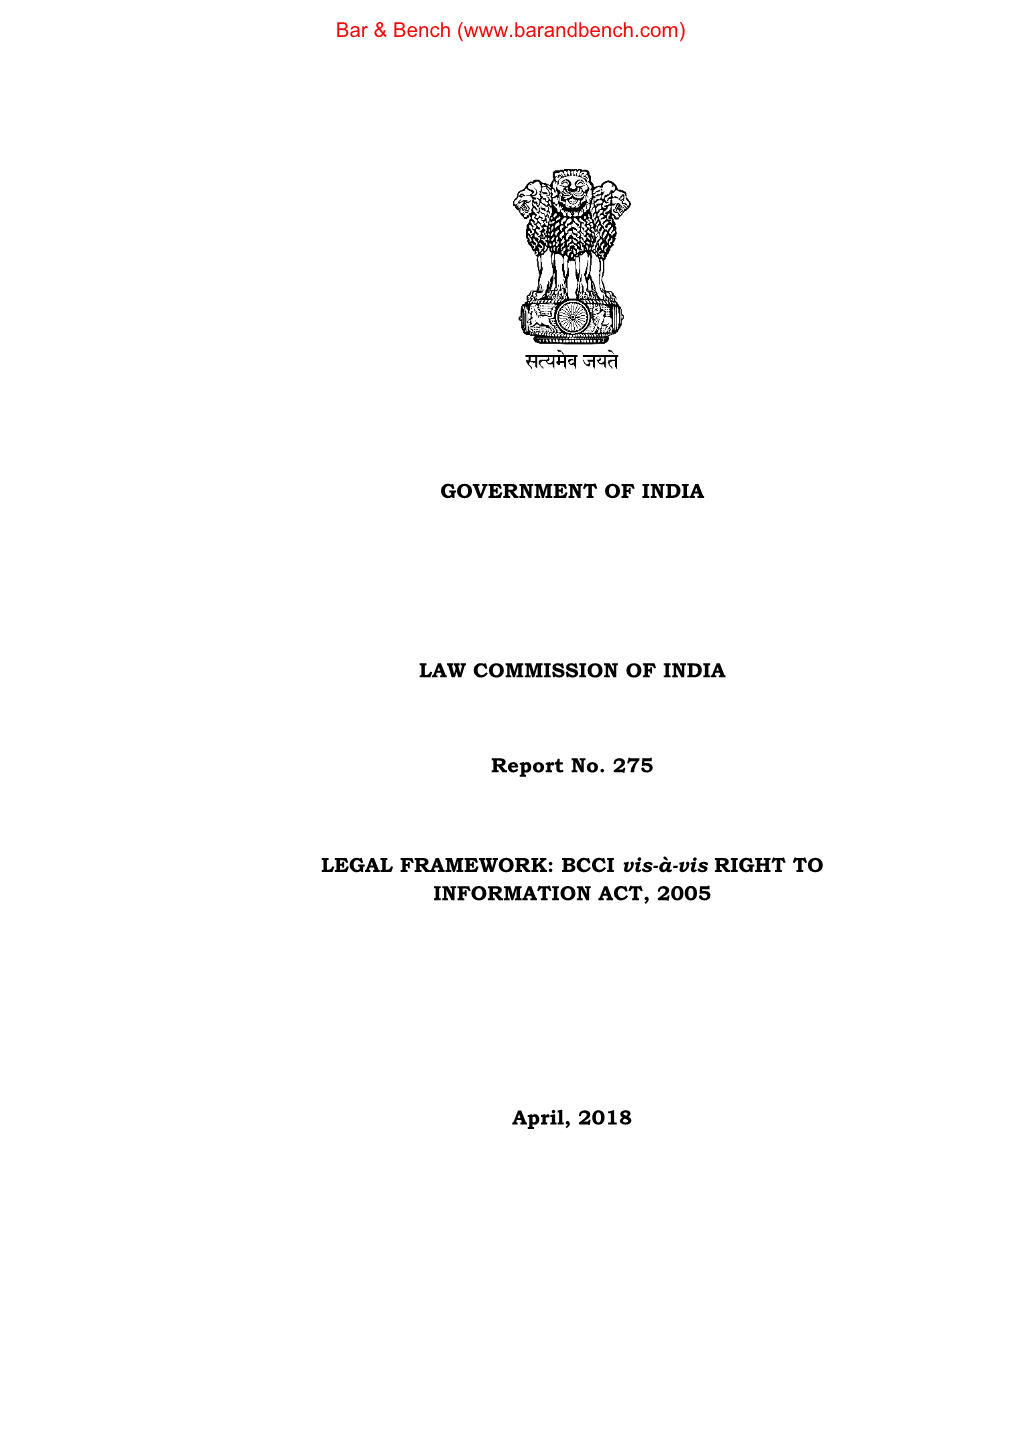 GOVERNMENT of INDIA LAW COMMISSION of INDIA Report No. 275 LEGAL FRAMEWORK: BCCI Vis-À-Vis RIGHT to INFORMATION ACT, 2005 April